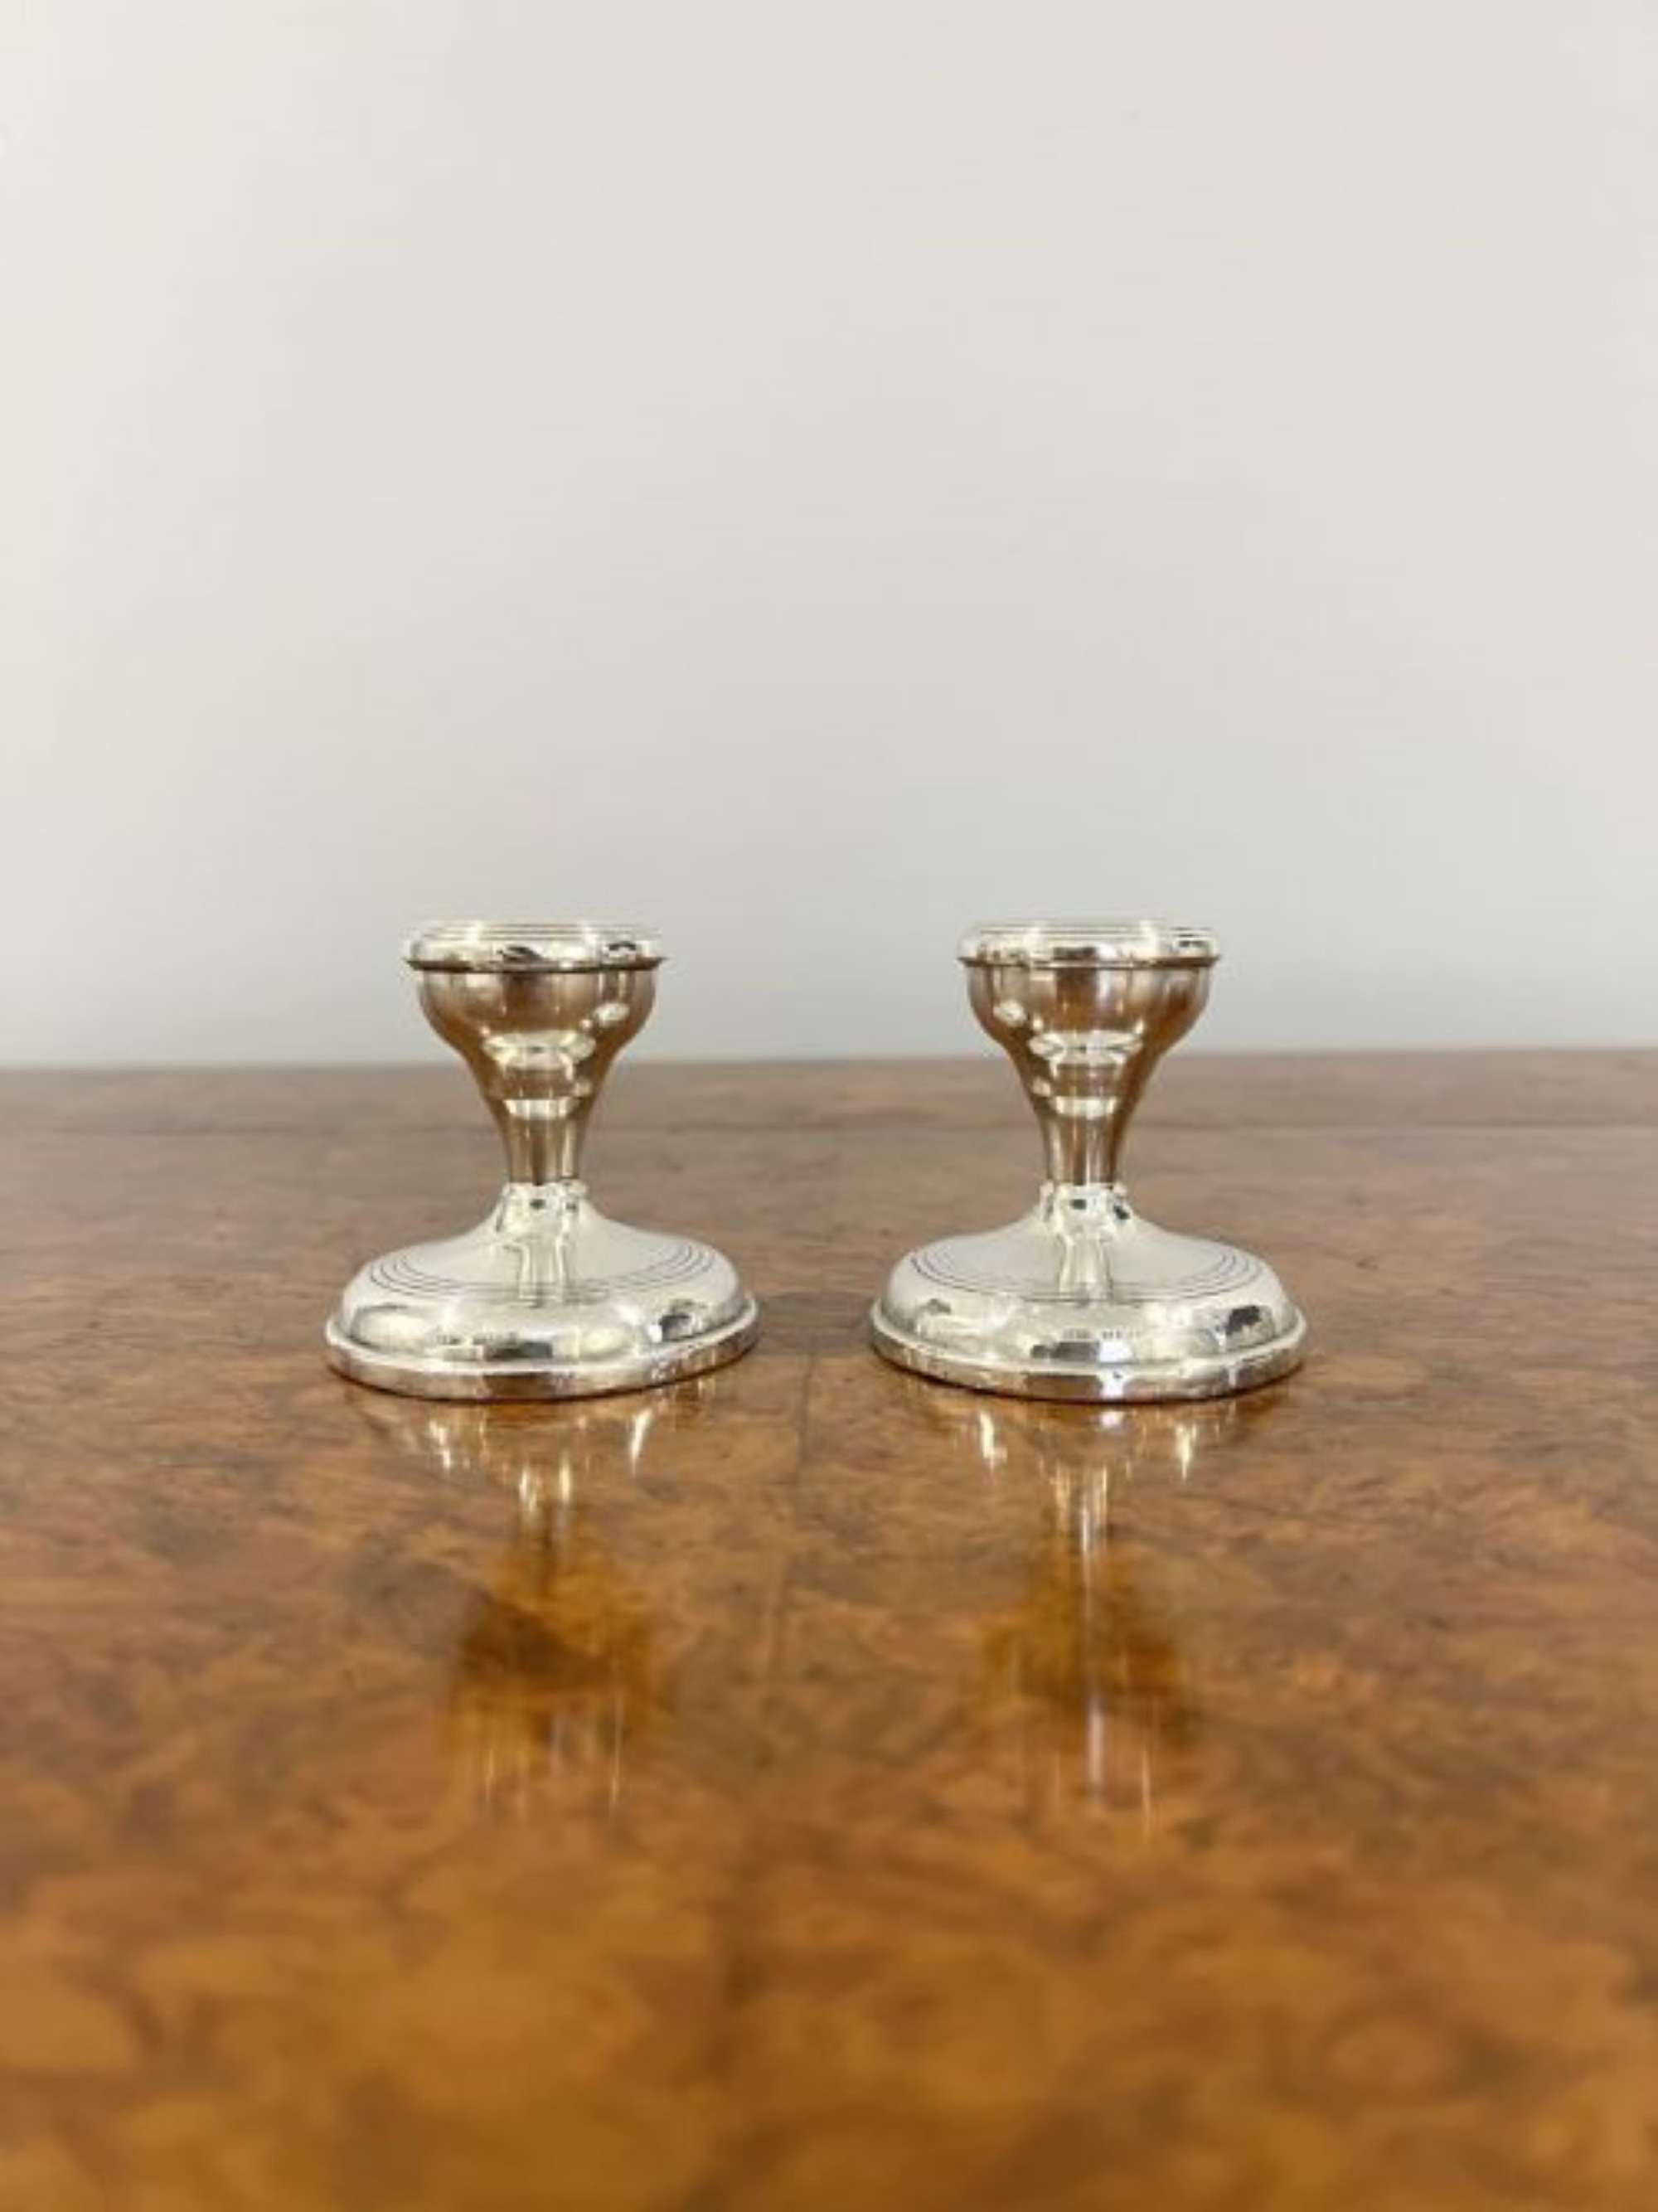 Quality Pair Of Small Antique Silver Candlesticks